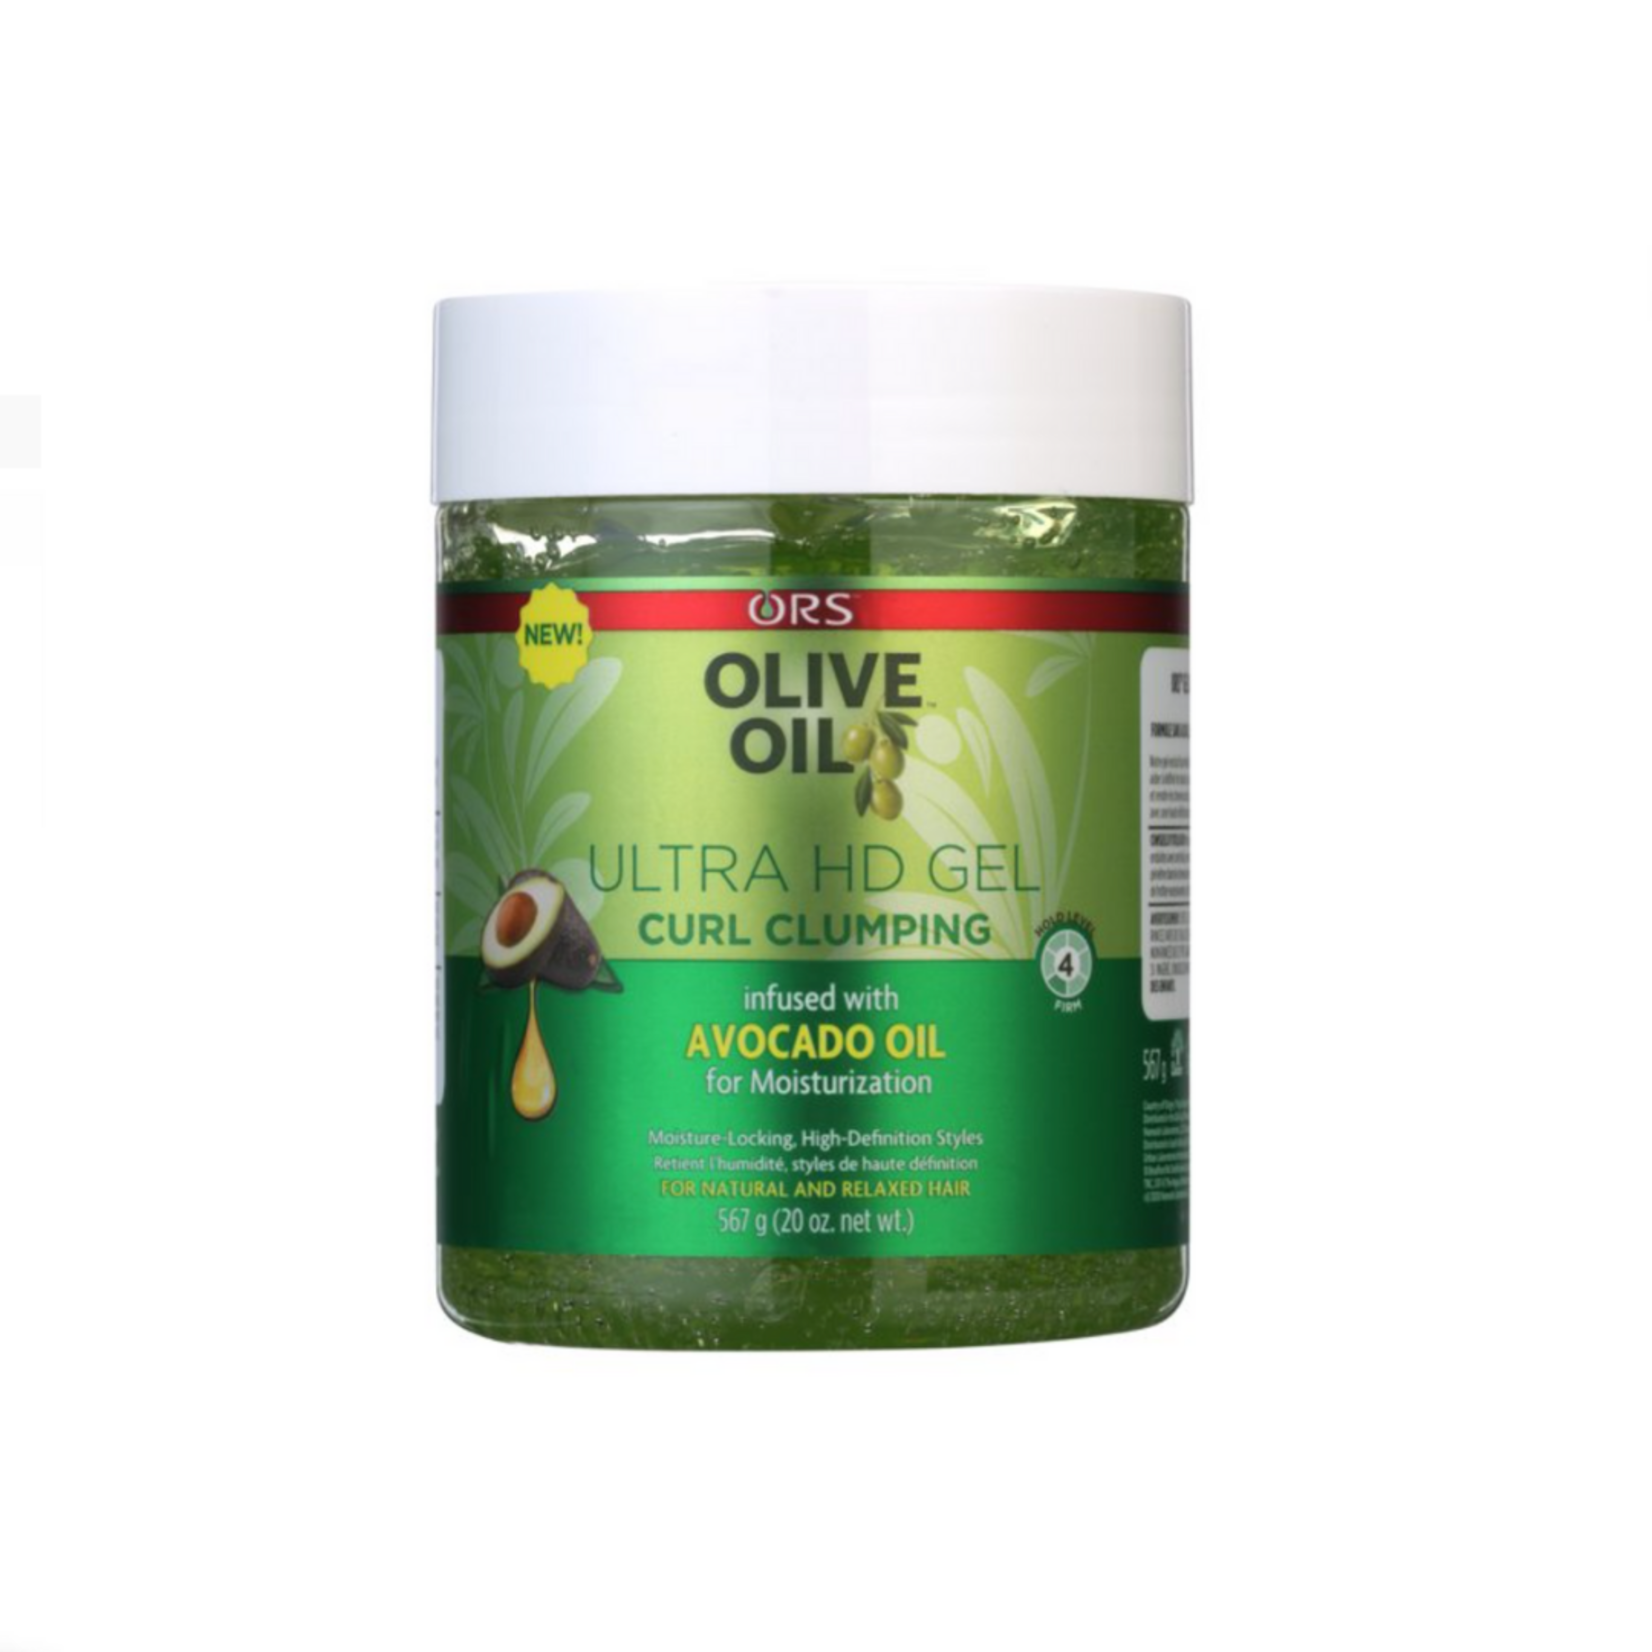 ors ORS Olive Oil Ultra HD Gel Curl Clumping infused with Avocado Oil